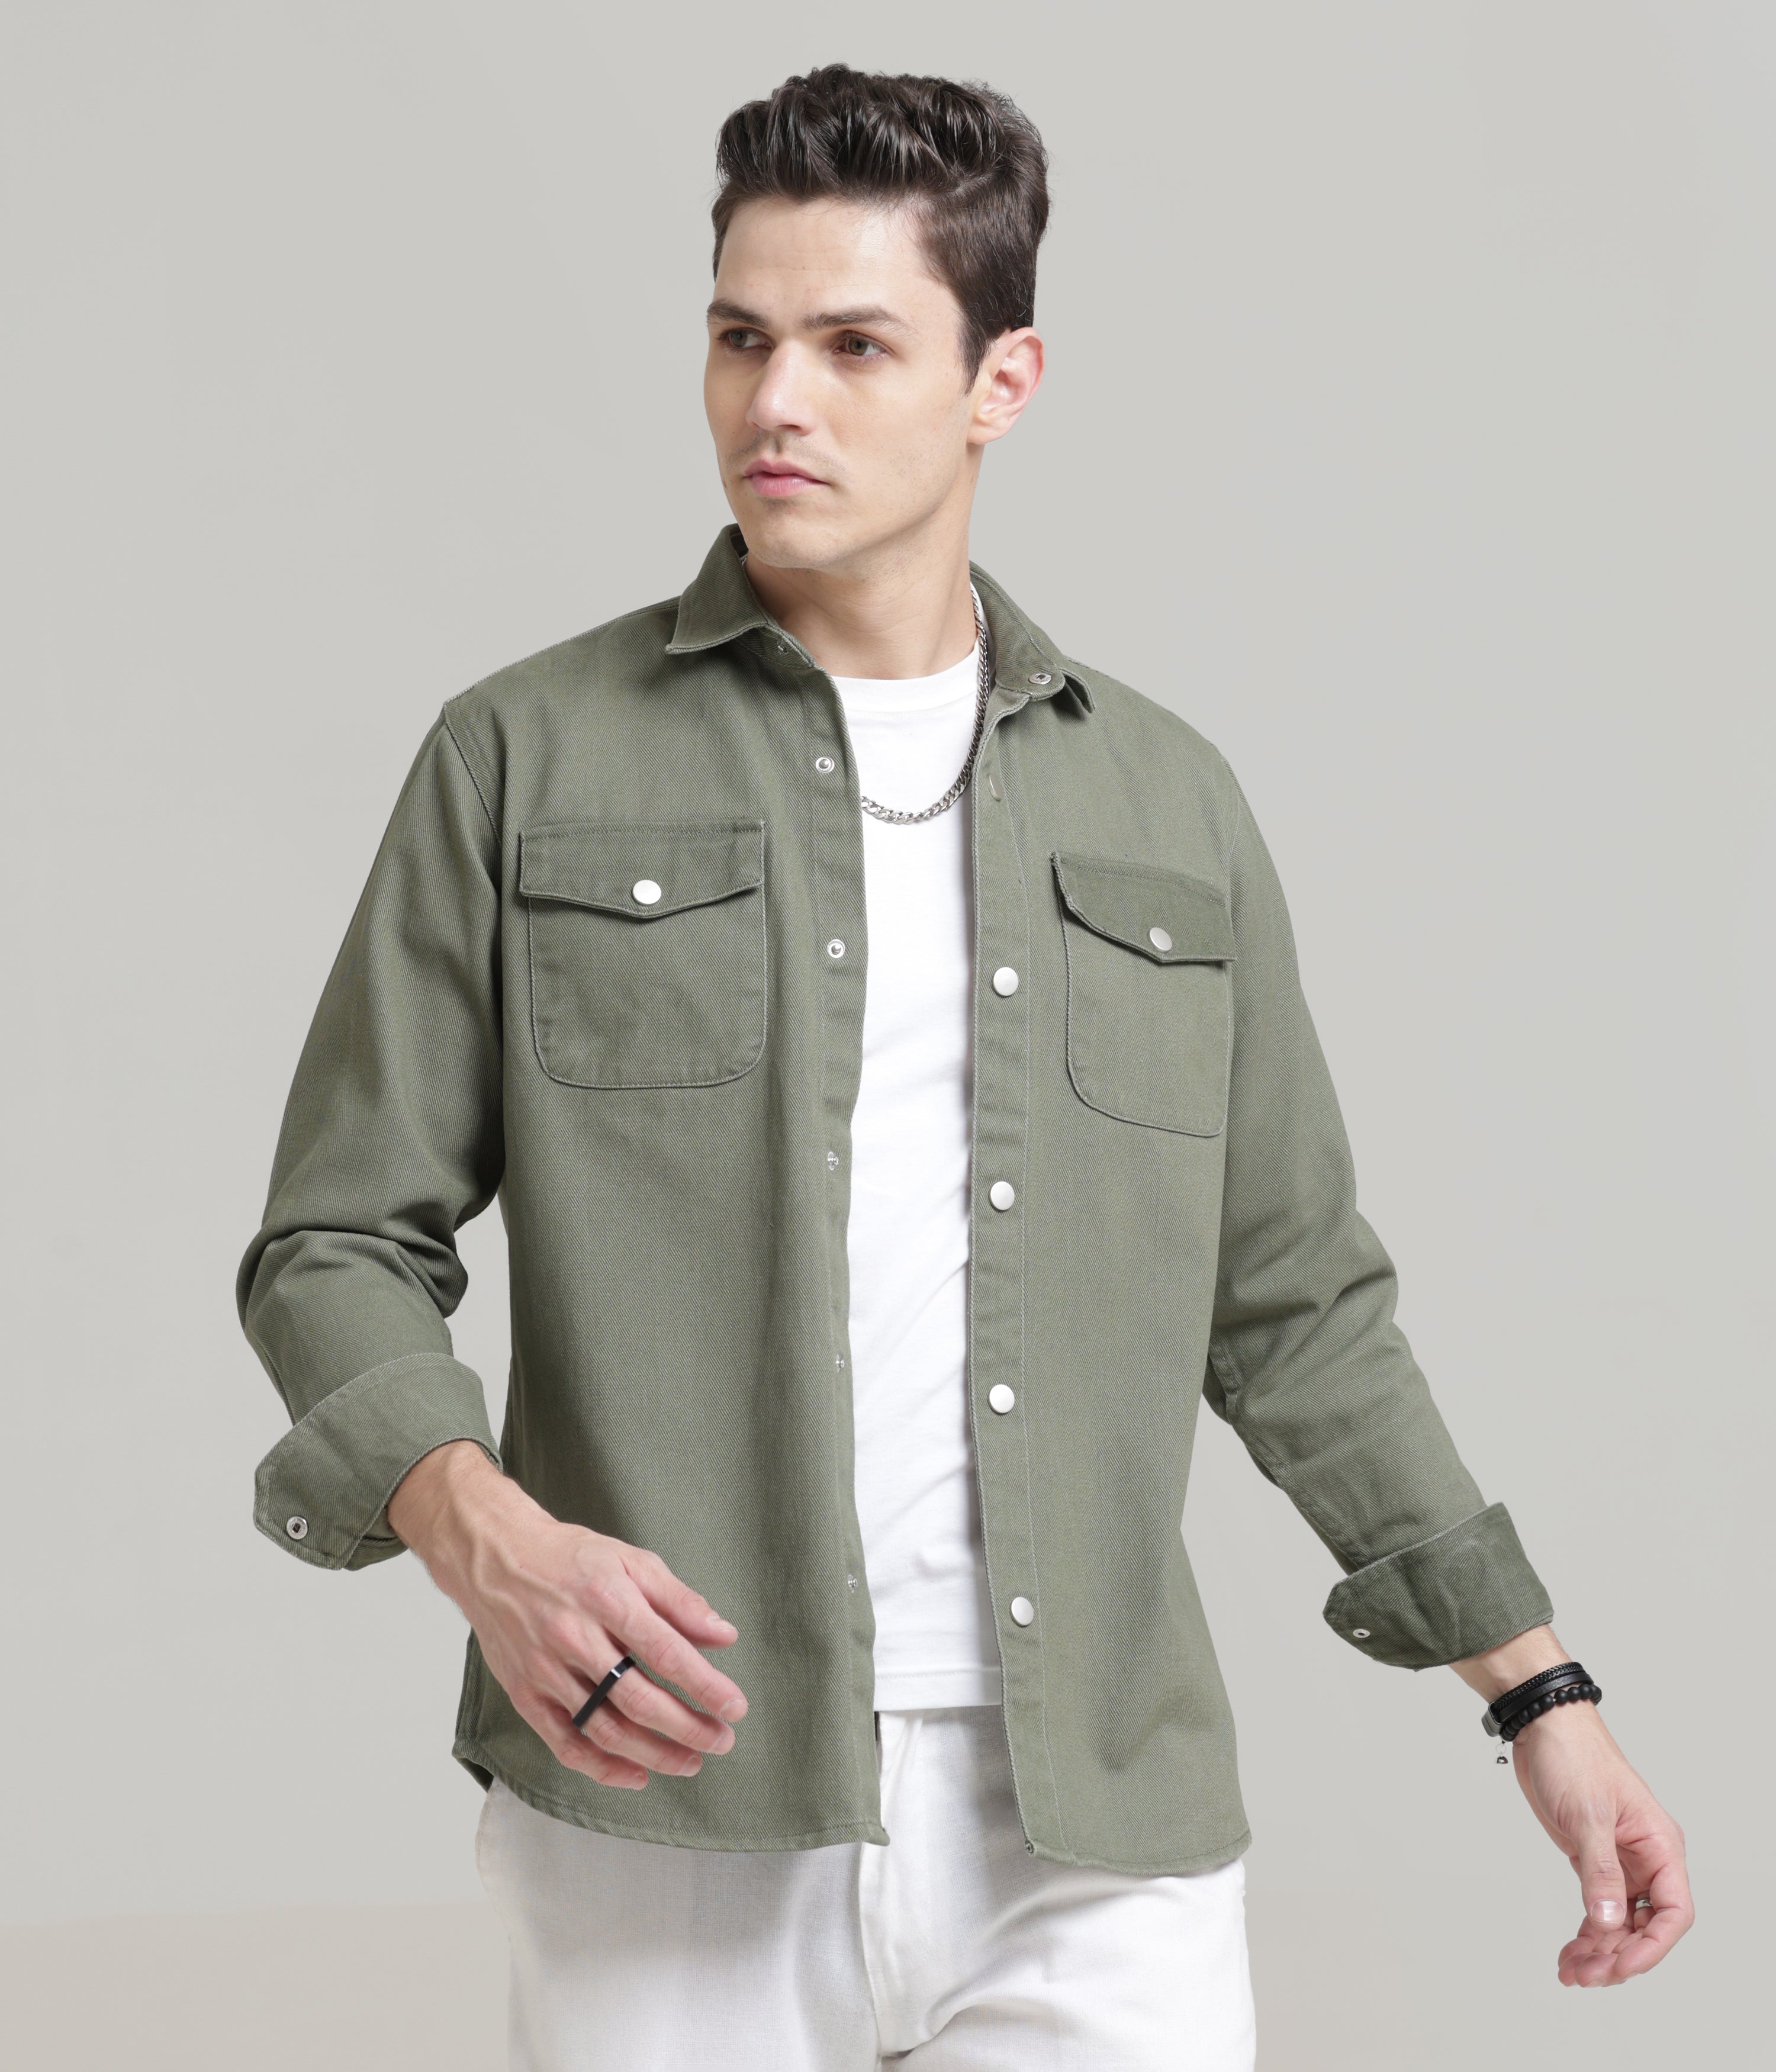 Olive Classic Fit Double Pocket Shirt in Heavy Twill Cotton